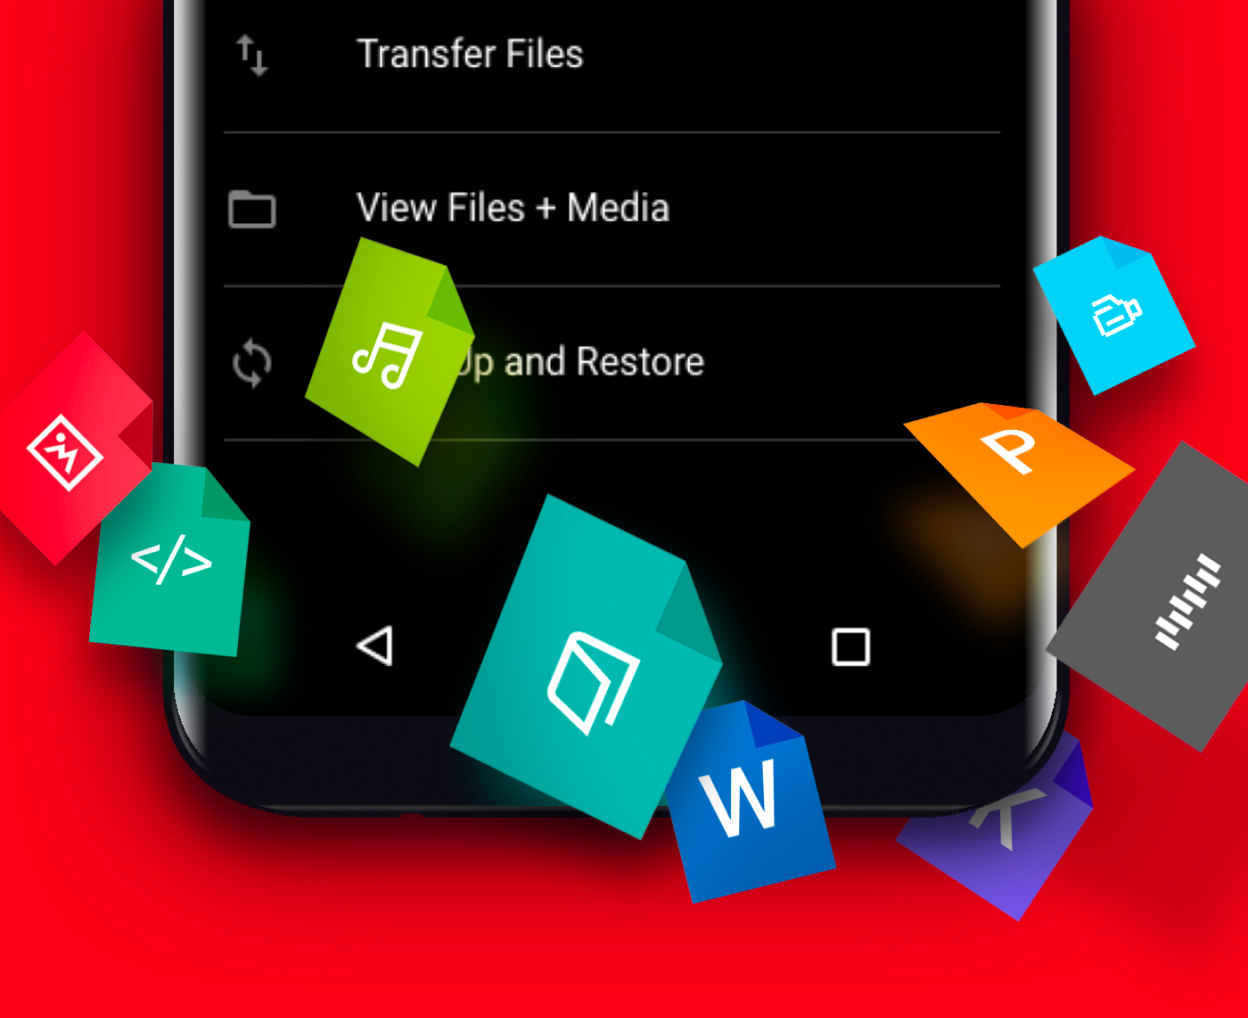 Sandisk iXpand drive – improving app experience